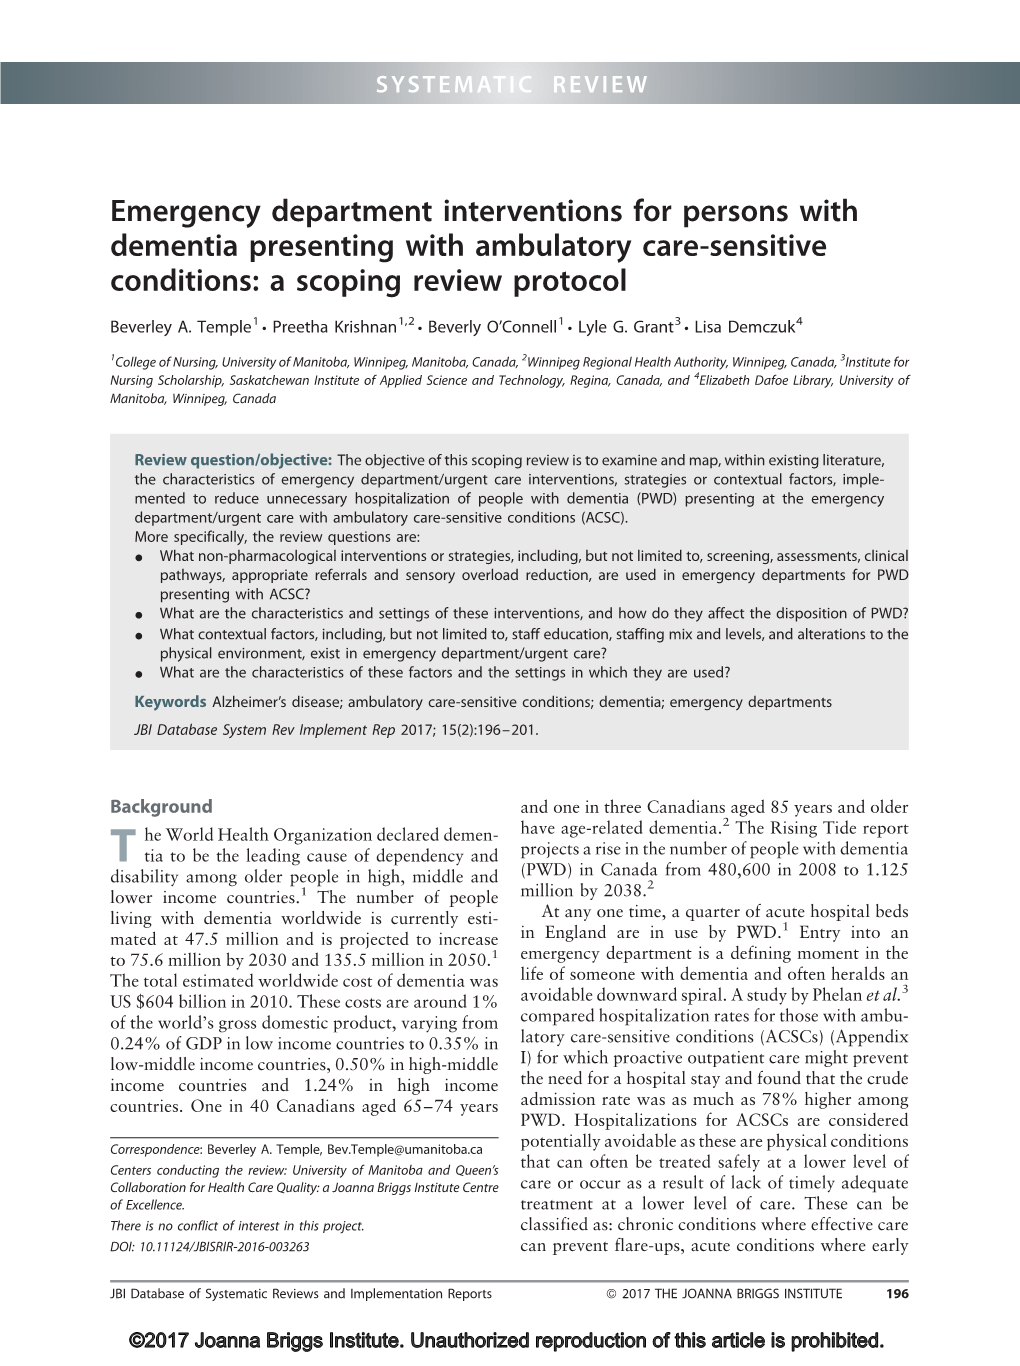 Emergency Department Interventions for Persons with Dementia Presenting with Ambulatory Care-Sensitive Conditions: a Scoping Review Protocol